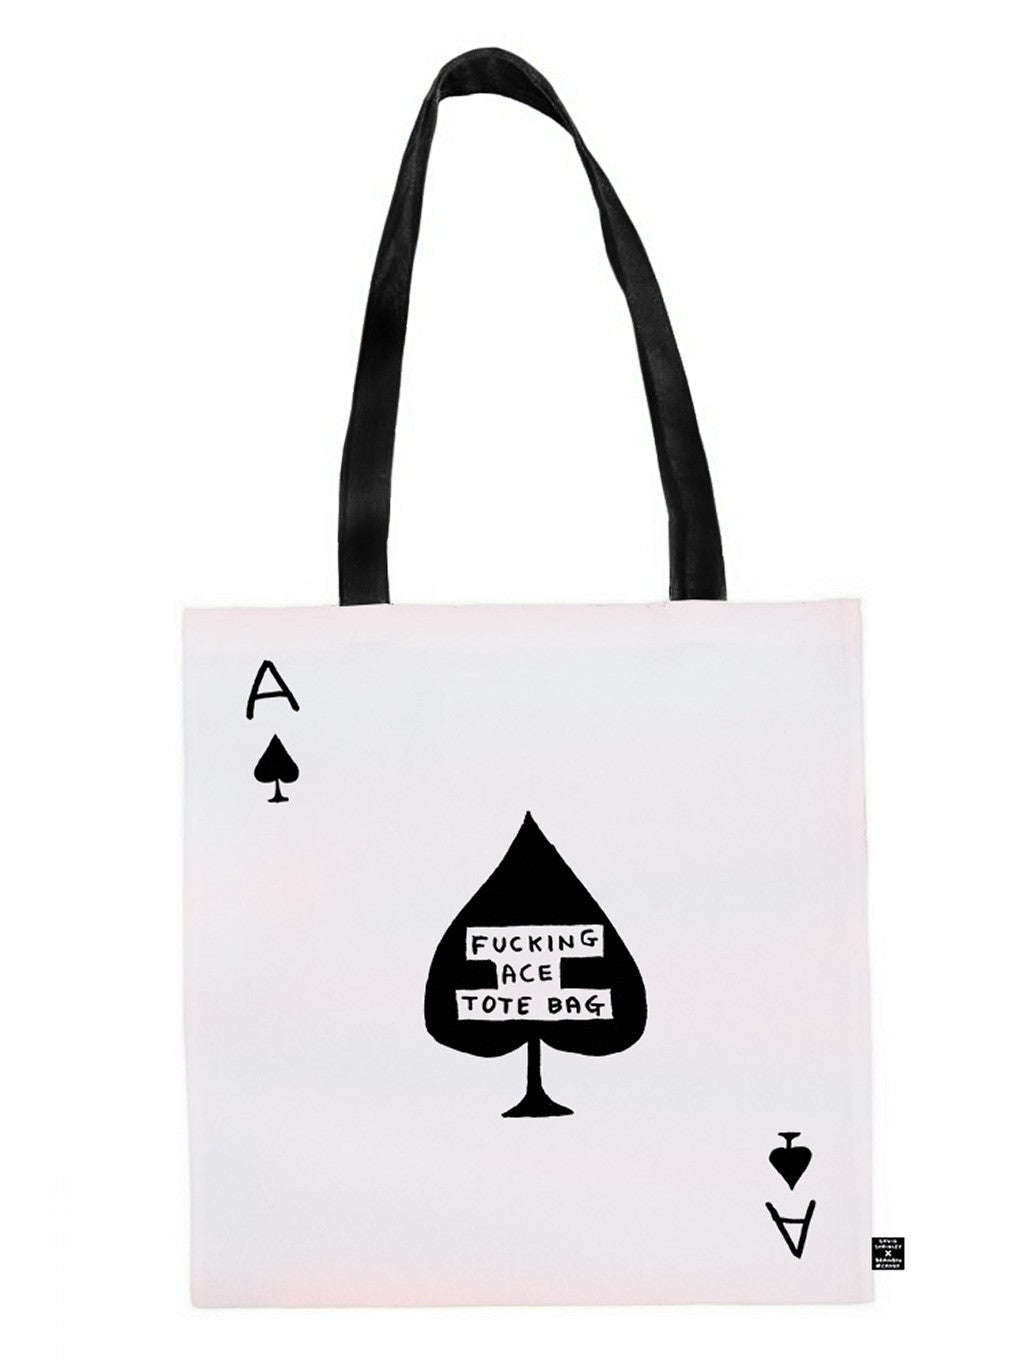 A white tote bag with black long handles extended upwards. The illustration mimics a black Ace card from a deck of playing cards but in the centre it says in back handwritten capital letters &#39;fucking ace tote bag&#39;.